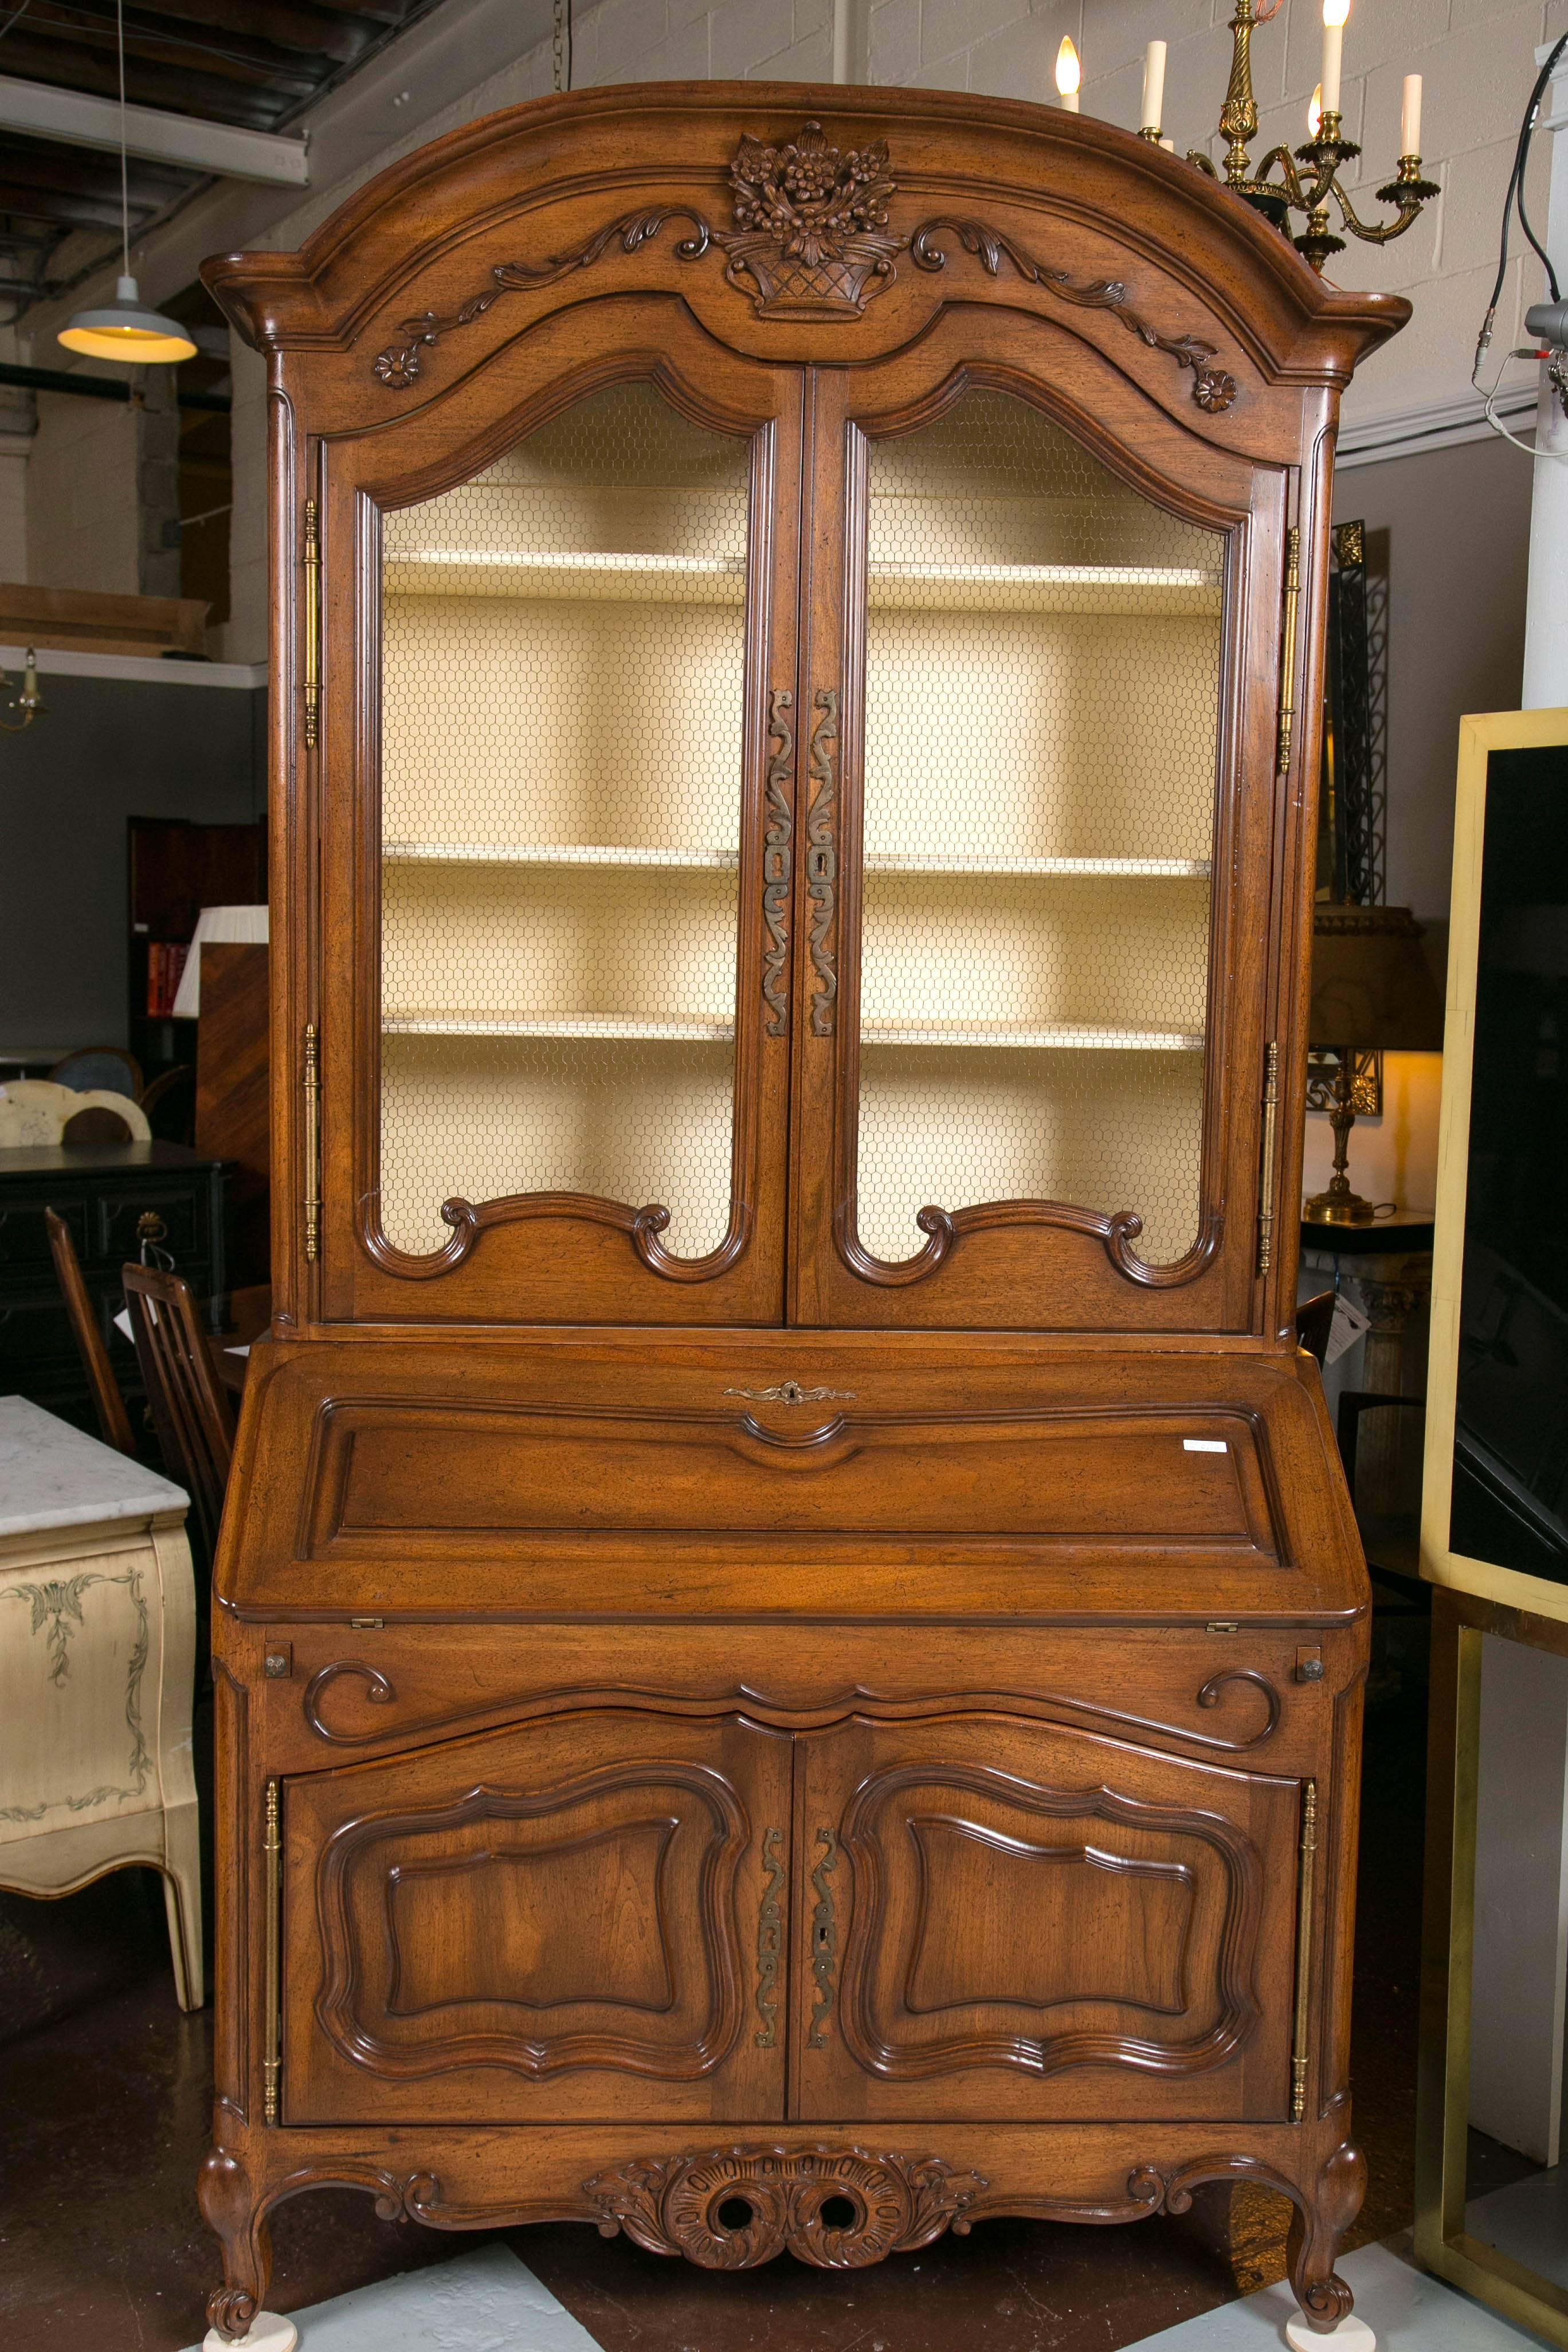 A fabulous French Country breakfront/secretary with cream paint colored interior. This Don Rousseau unsigned piece bears all of the workmanship and detail usually seen in a custom quality piece by this highly sought after cabinetmaker. Fabulous old